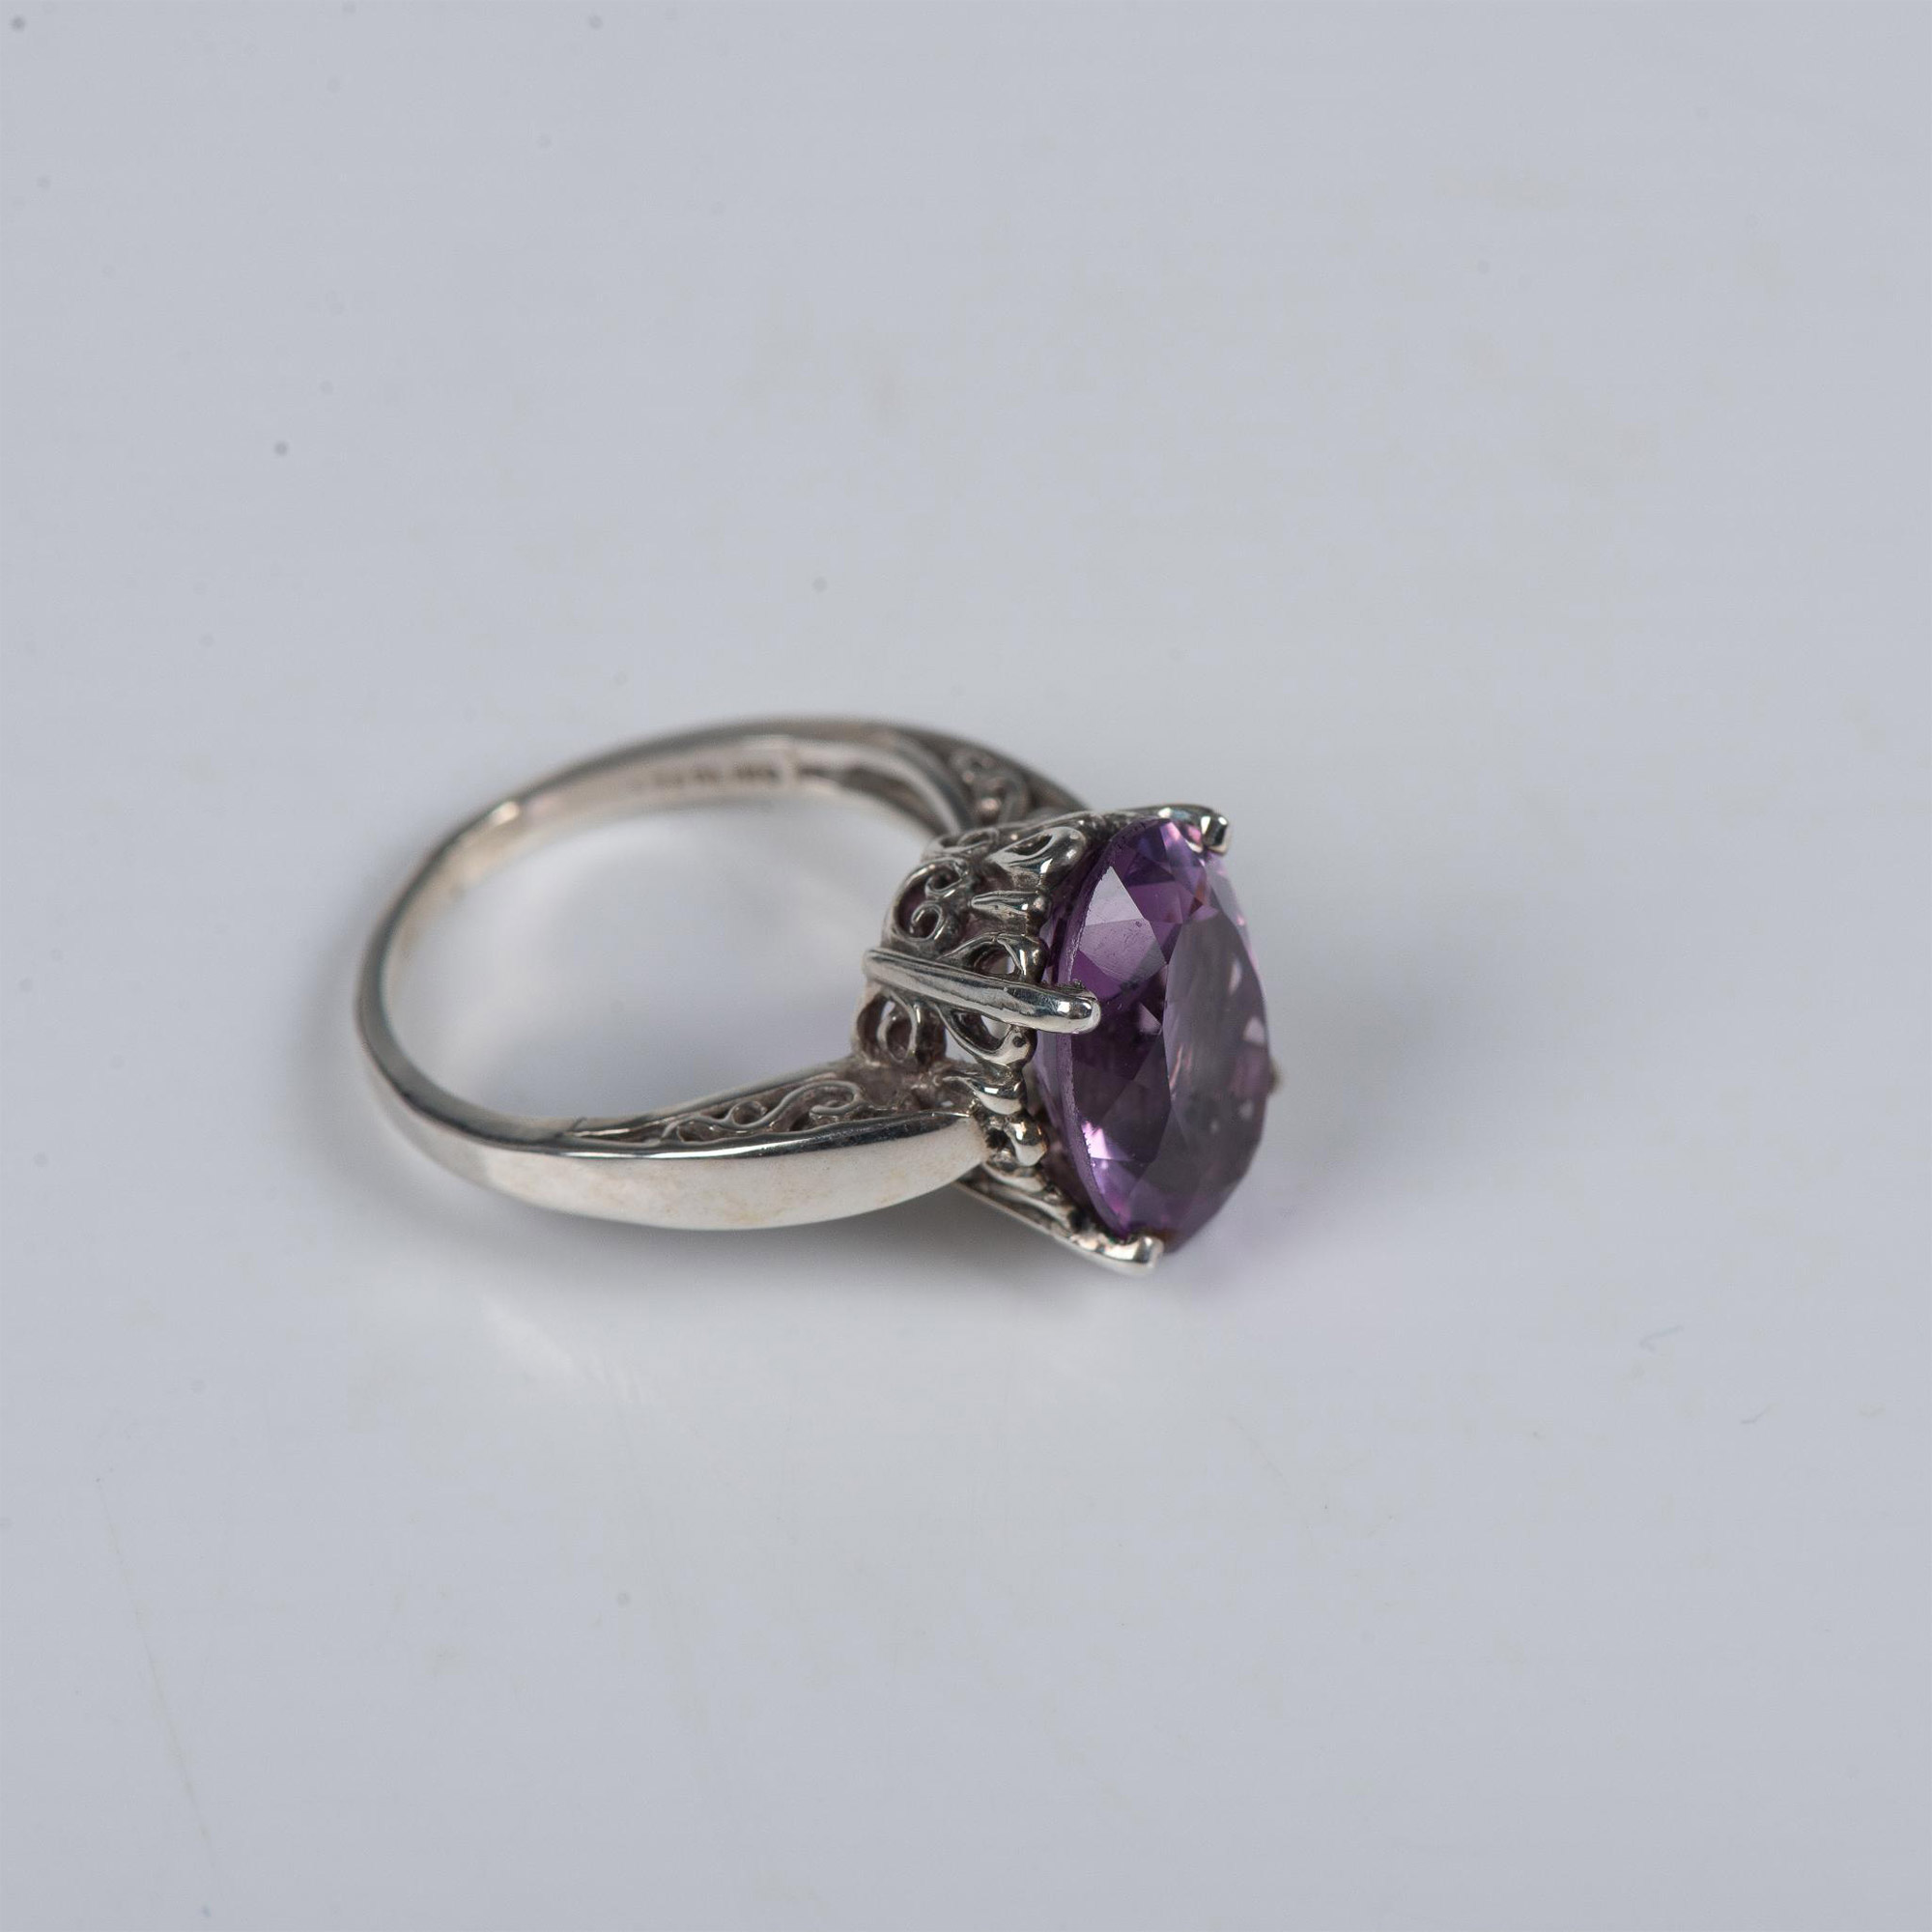 Fabulous Hand Crafted Kabana Sterling Silver & Amethyst Ring - Image 3 of 7